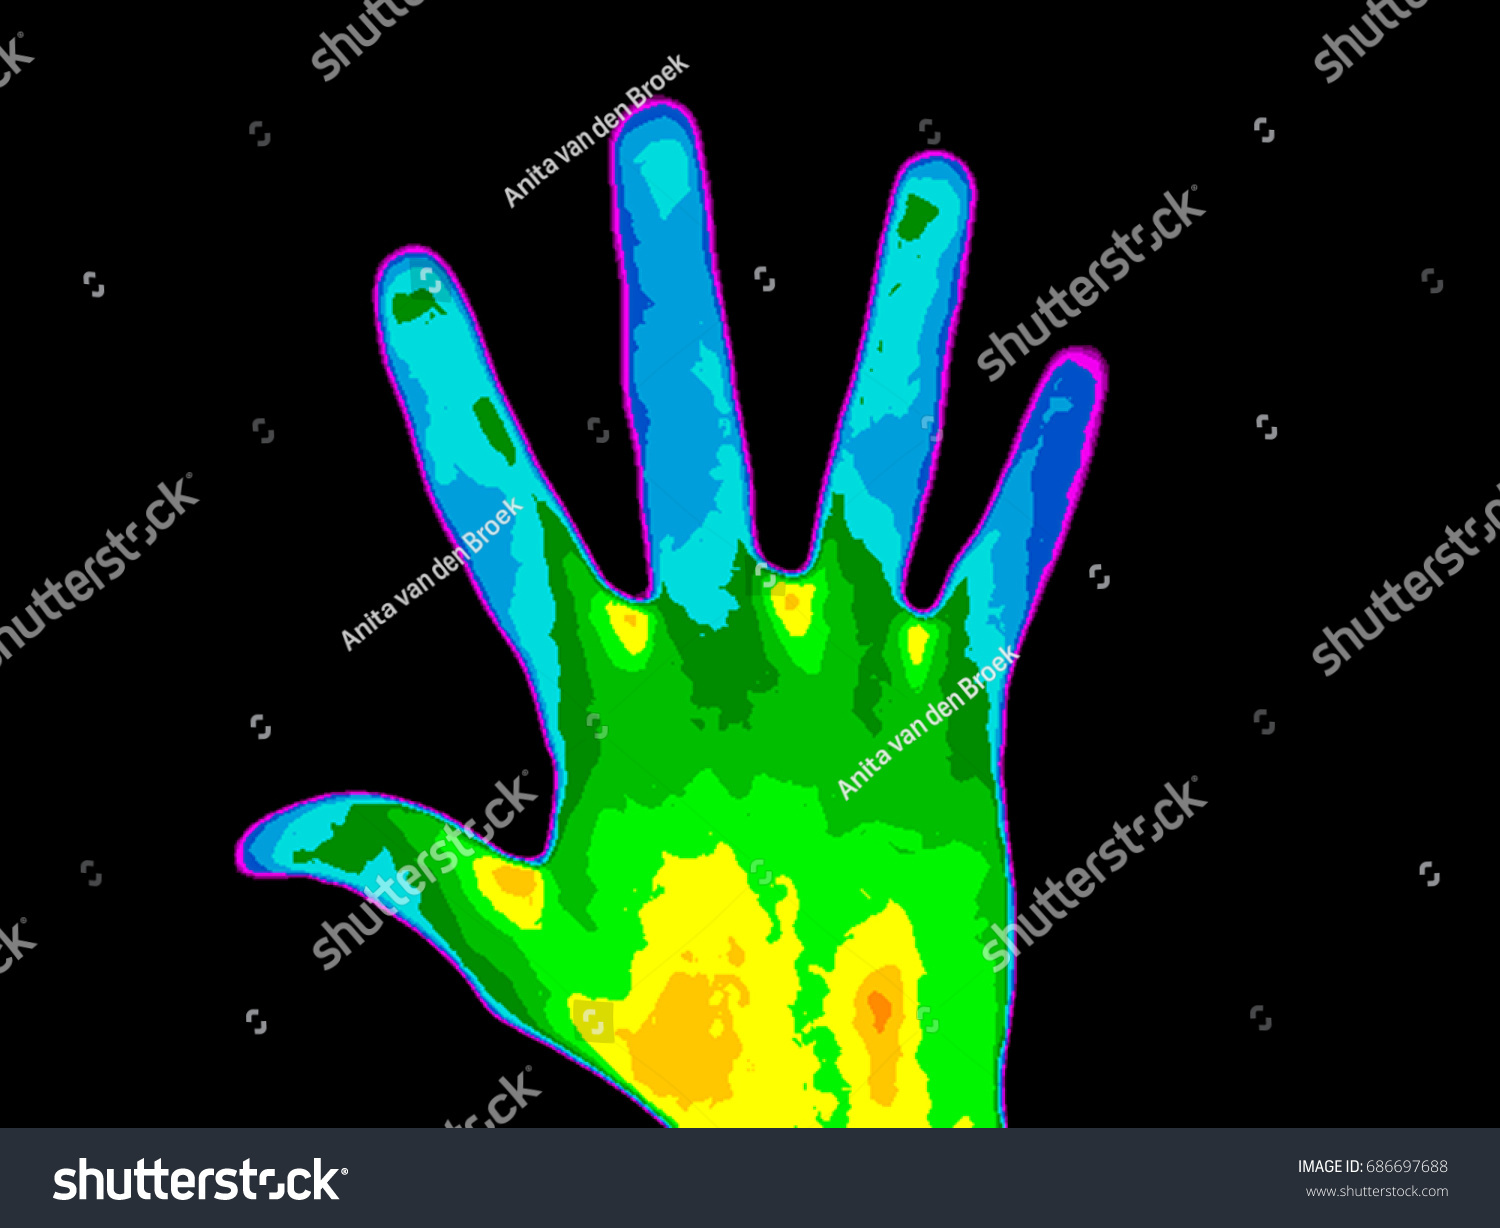 Thermographic photo of palm of a persons hand with the photo showing different temperature in a range of colors from blue showing cold to red showing hot, blue fingers can indicate multiple sclerosis. #686697688